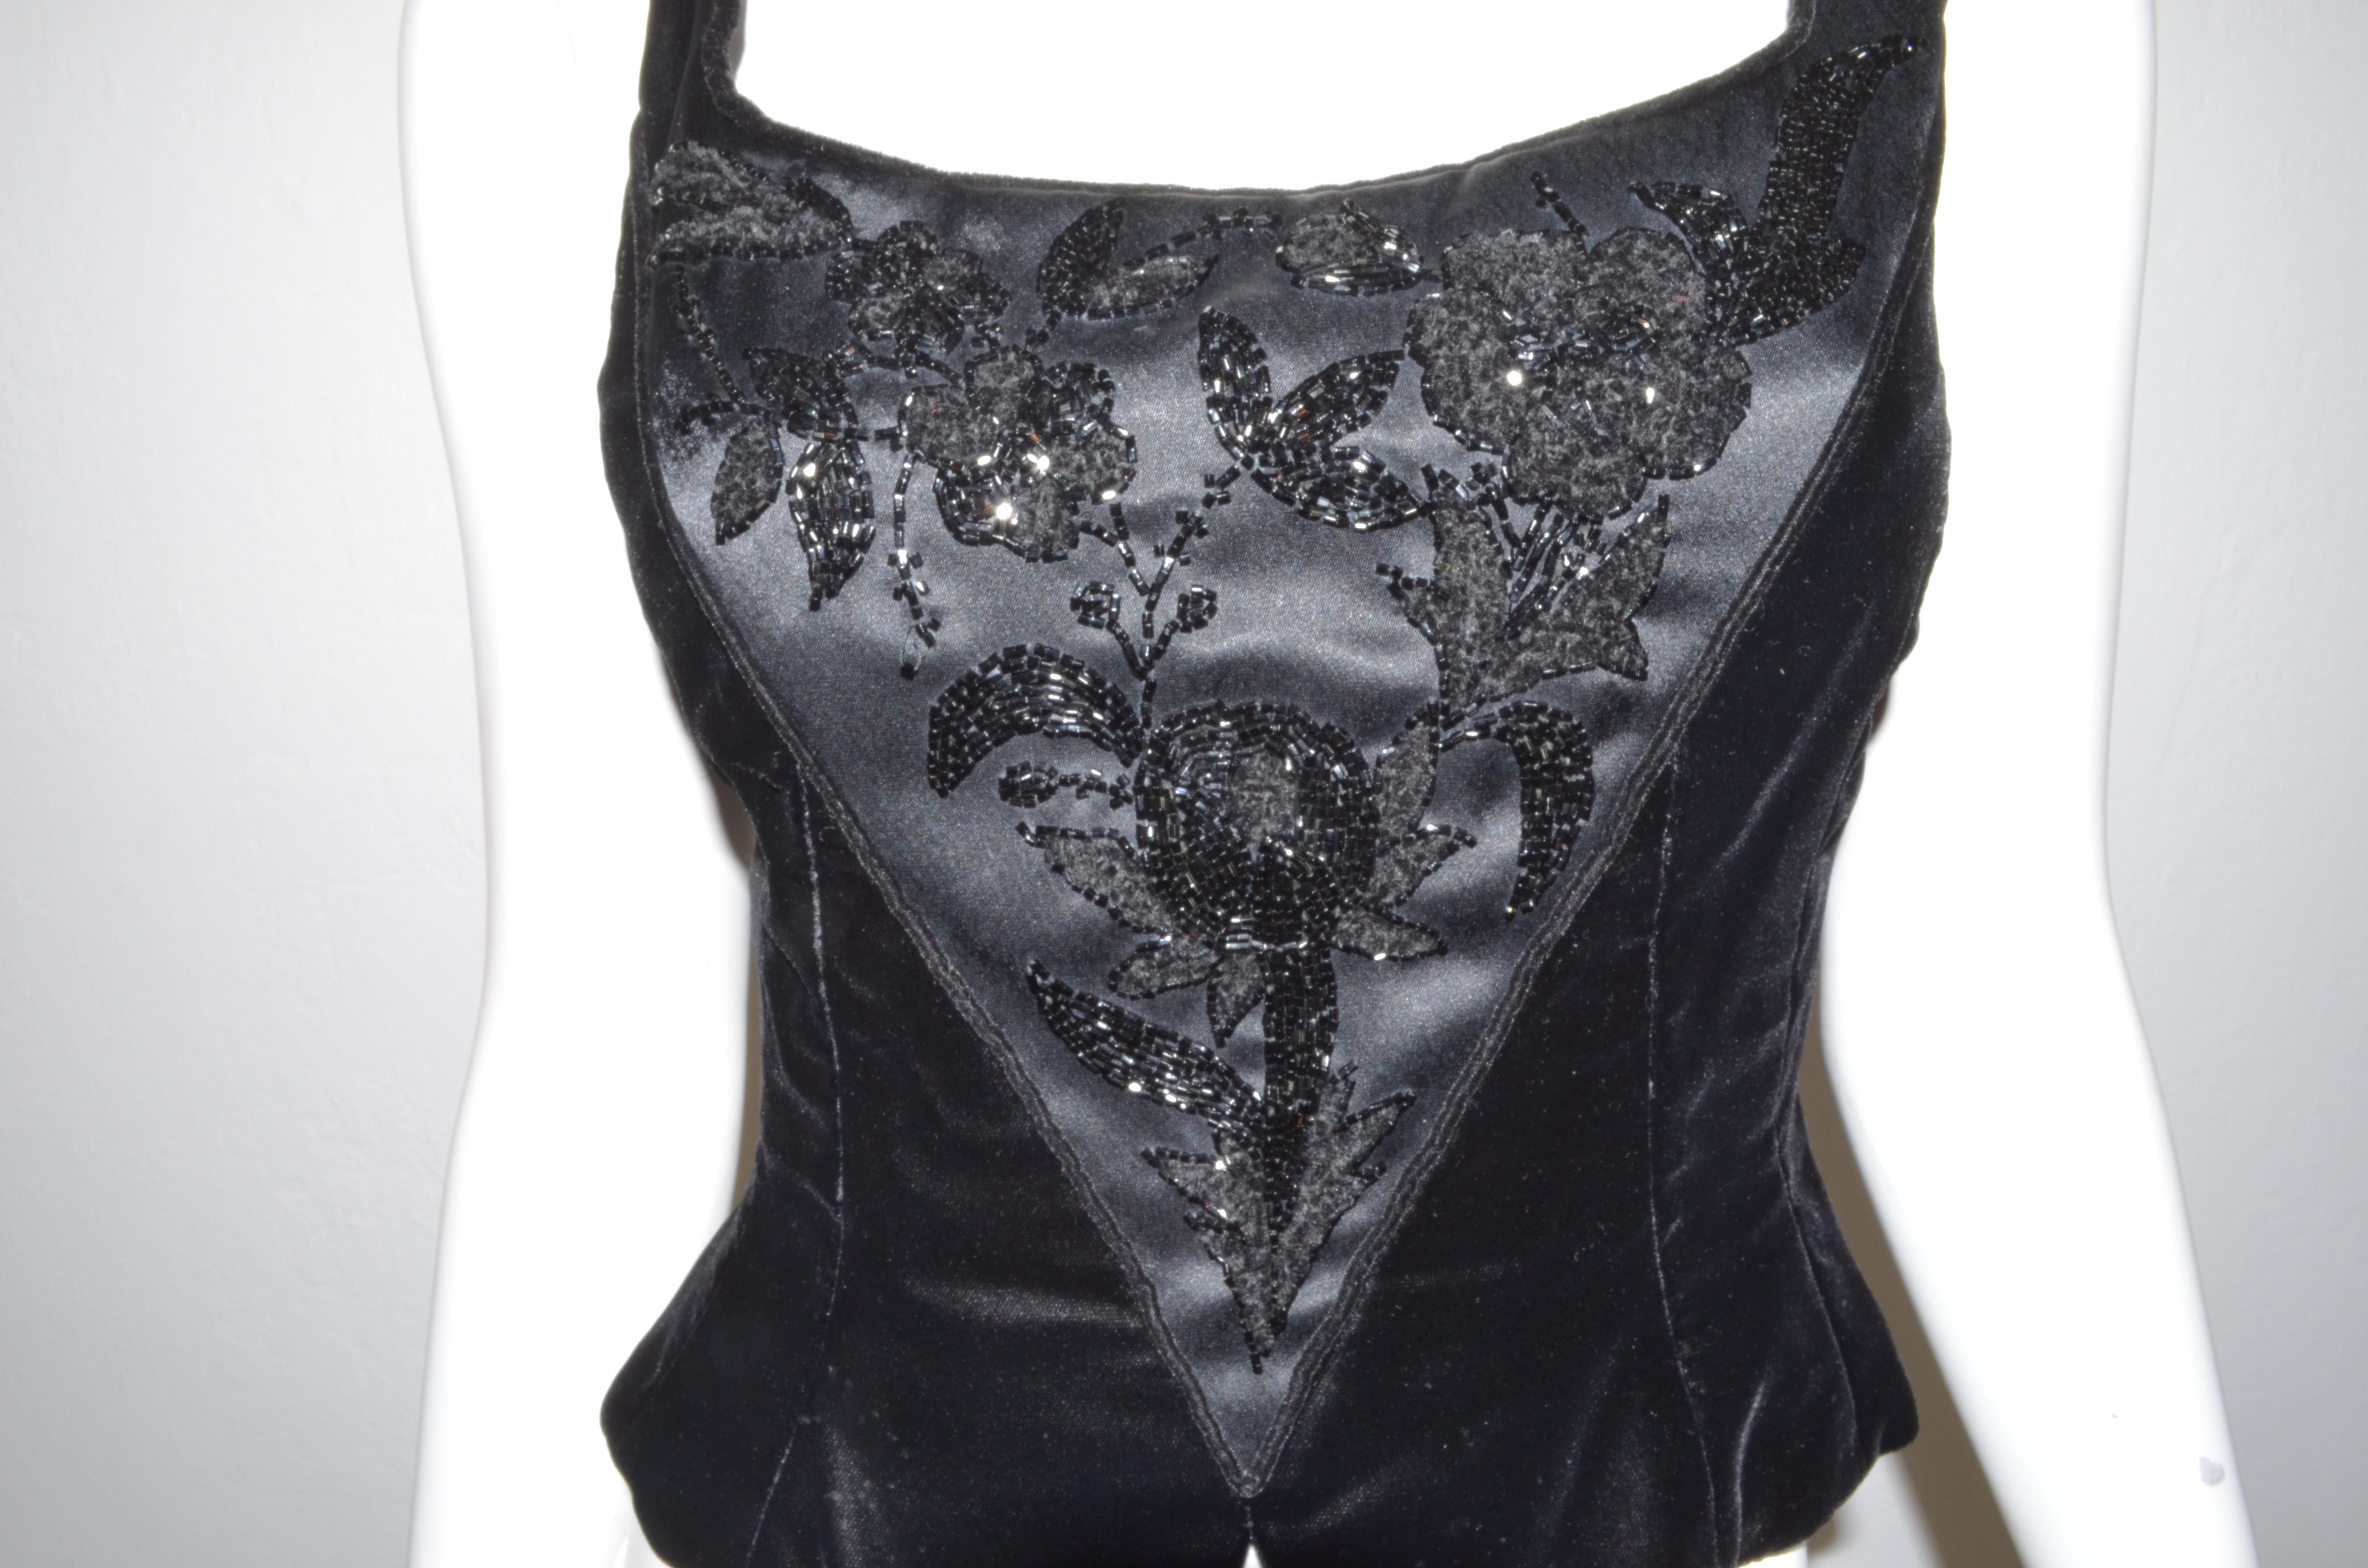 Vintage corset top featured in black velvet with bead embellishing at the front and a zipper back closure. Designer label has been removed, size 4 -- Top is composed with 65% acetate and 35% rayon, crepe: 75% triacetate, 25% polyester.